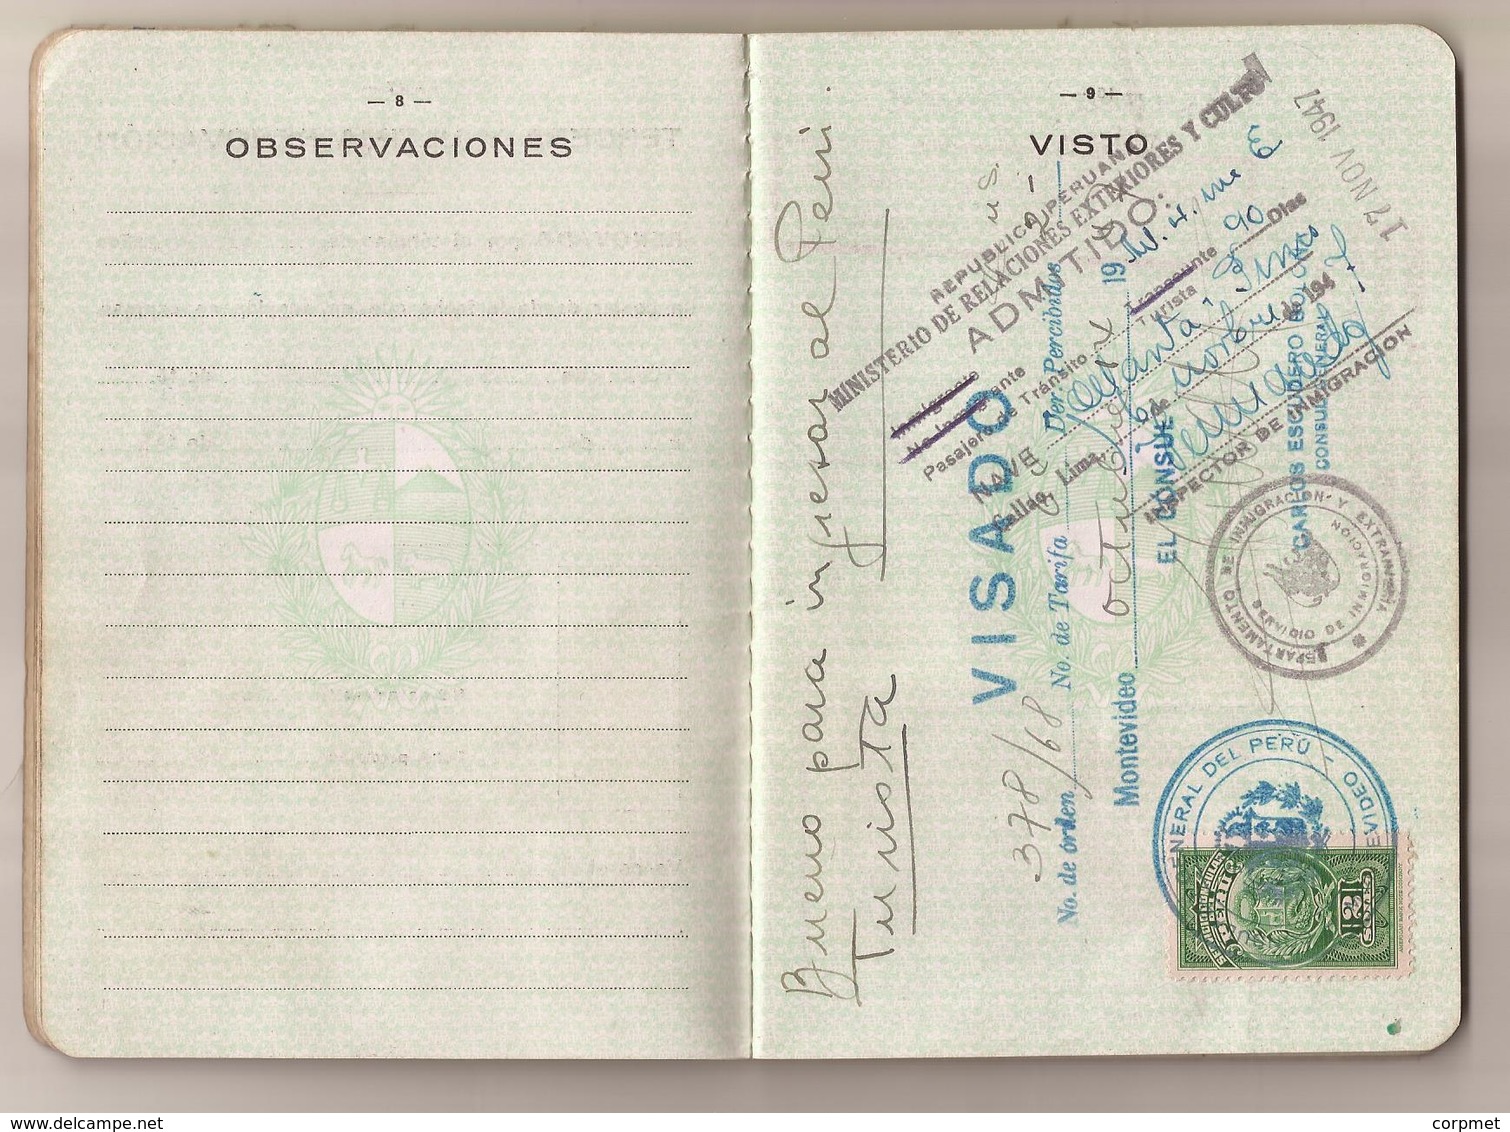 URUGUAY 1947 PASSPORT- PASSEPORT -multiple VISAS and STAMPS - includes US, BRITISH, FRENCH zone of GERMANY visas+revenue